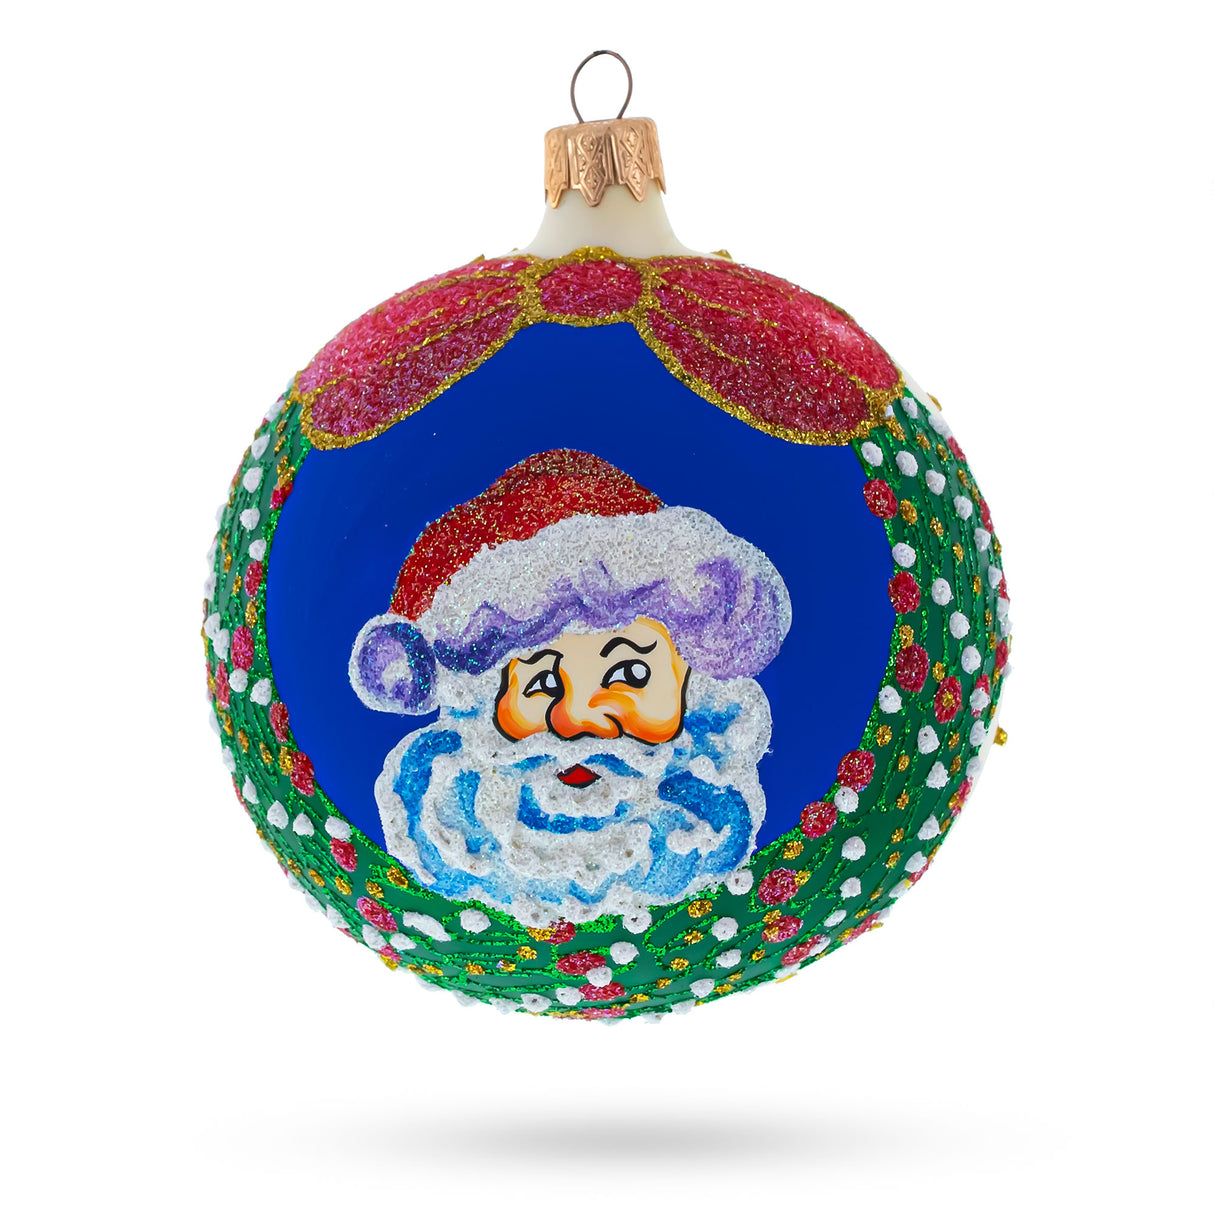 Festive Santa Wreath Gifts - Blown Glass Ball Christmas Ornament 4 Inches in White color, Round shape